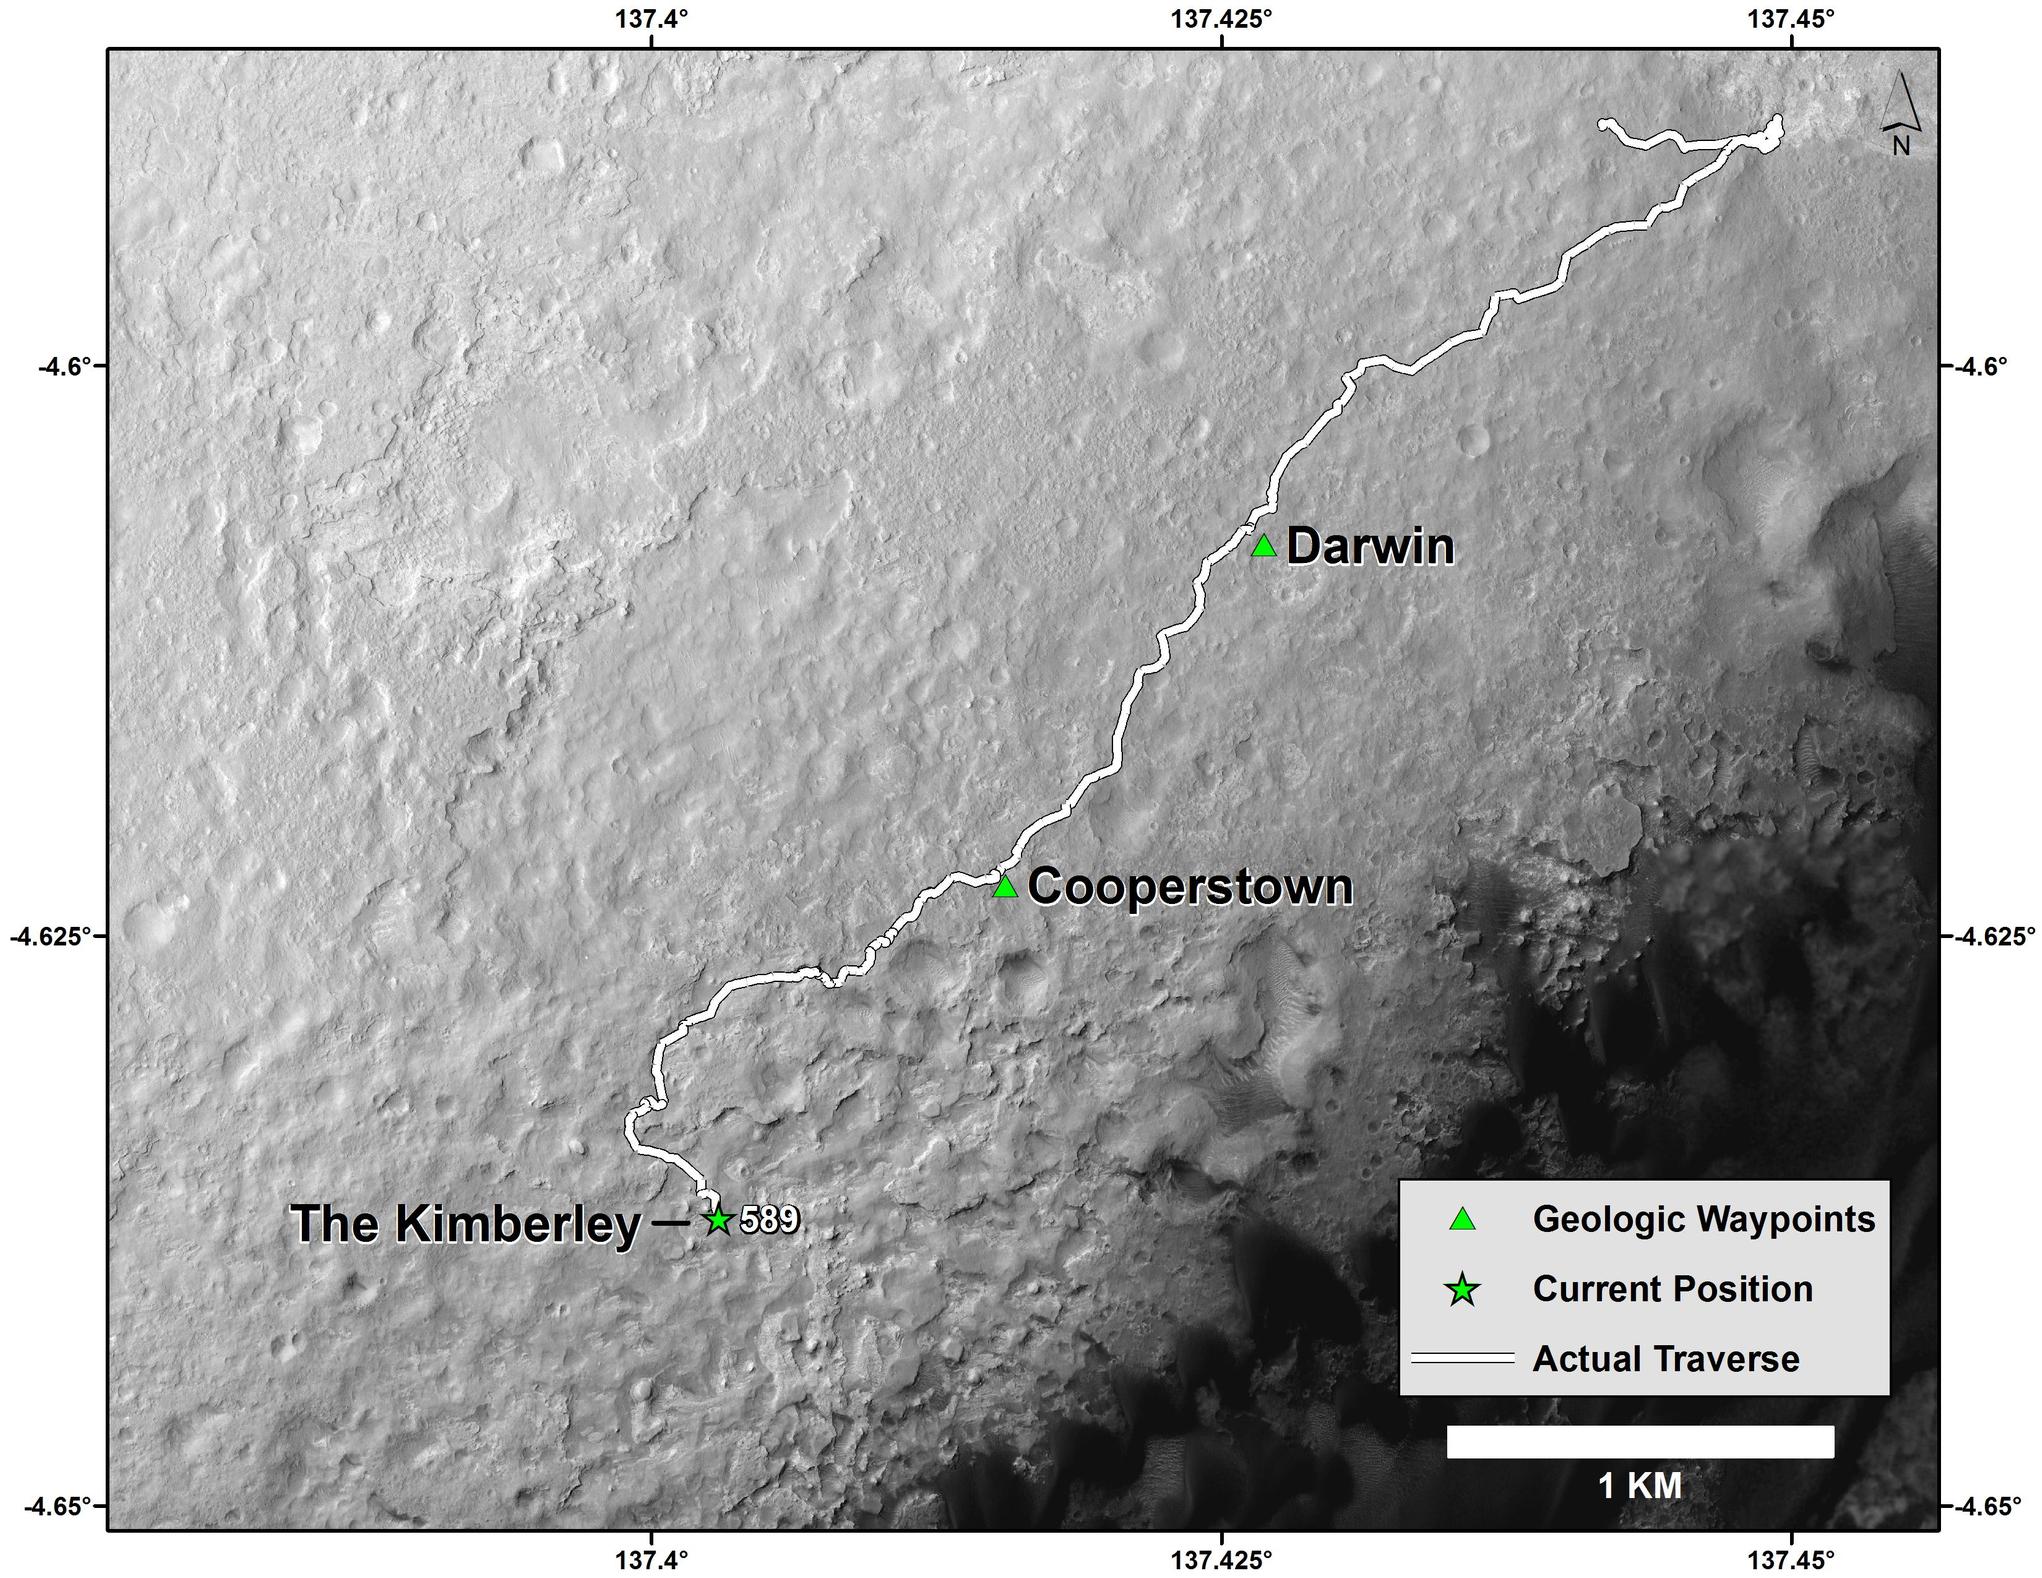 This map shows the route driven by NASA's Curiosity Mars rover from the "Bradbury Landing" location where it landed in August 2012 (the start of the line in upper right) to a major waypoint called "the Kimberley."